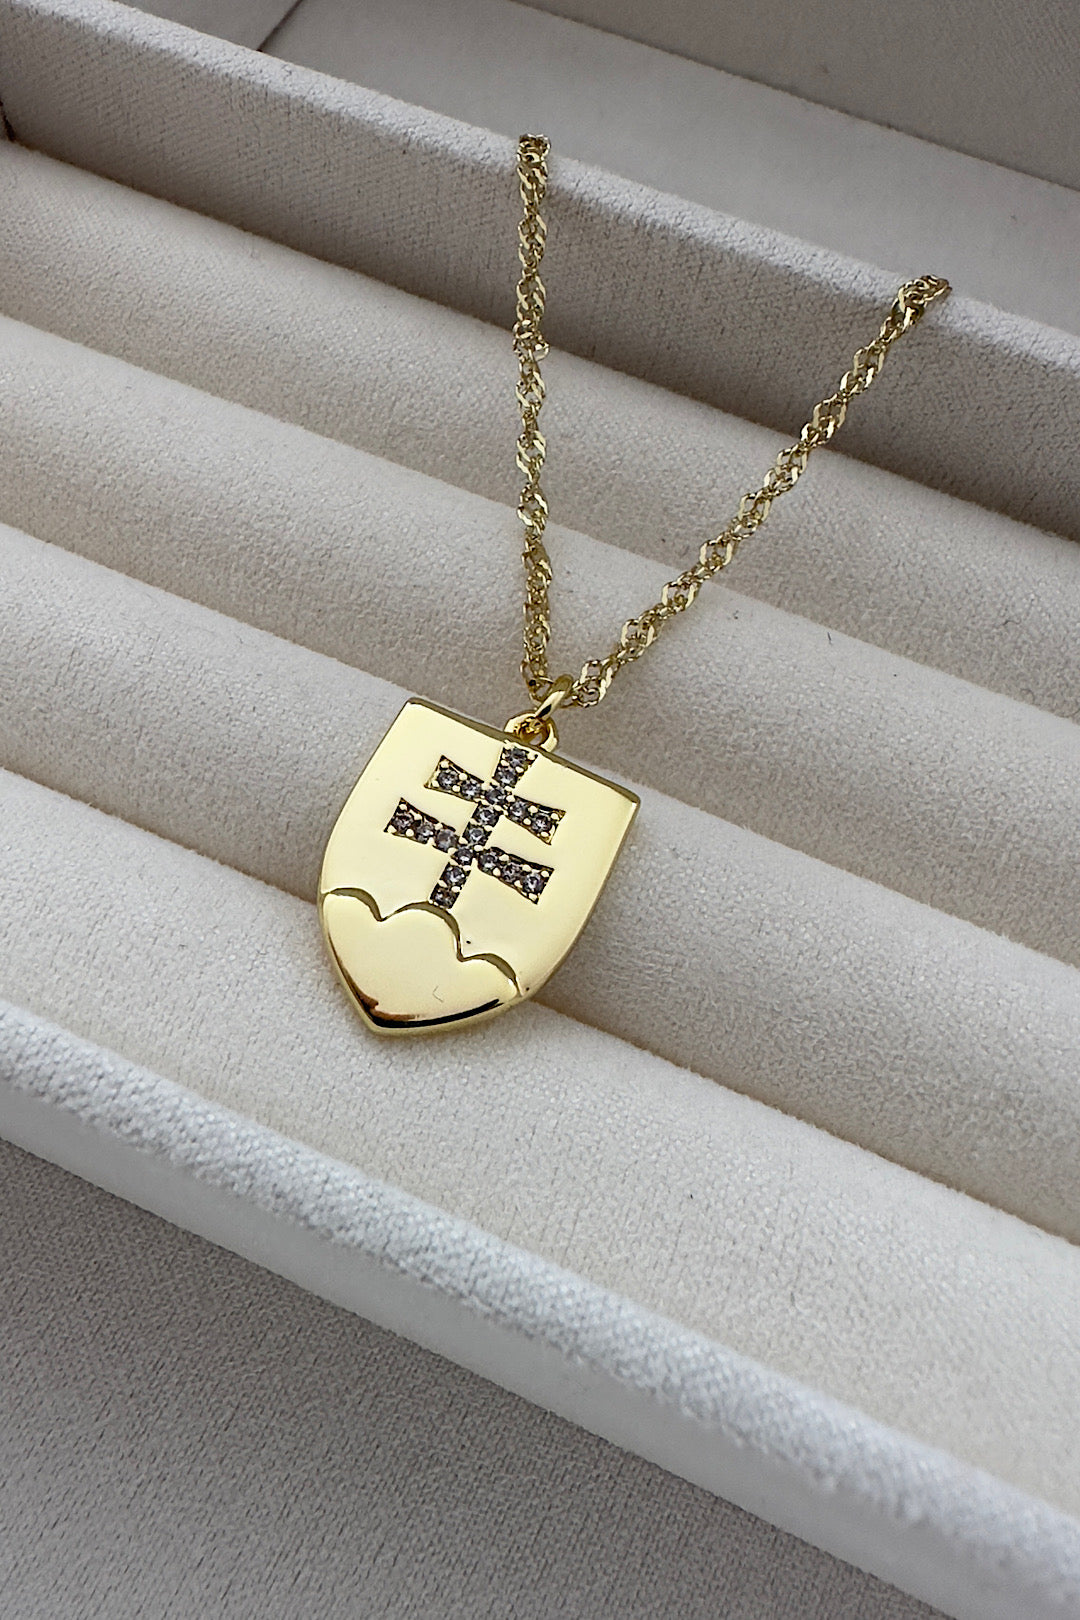 Slovakia Coat Of Arms Necklace 